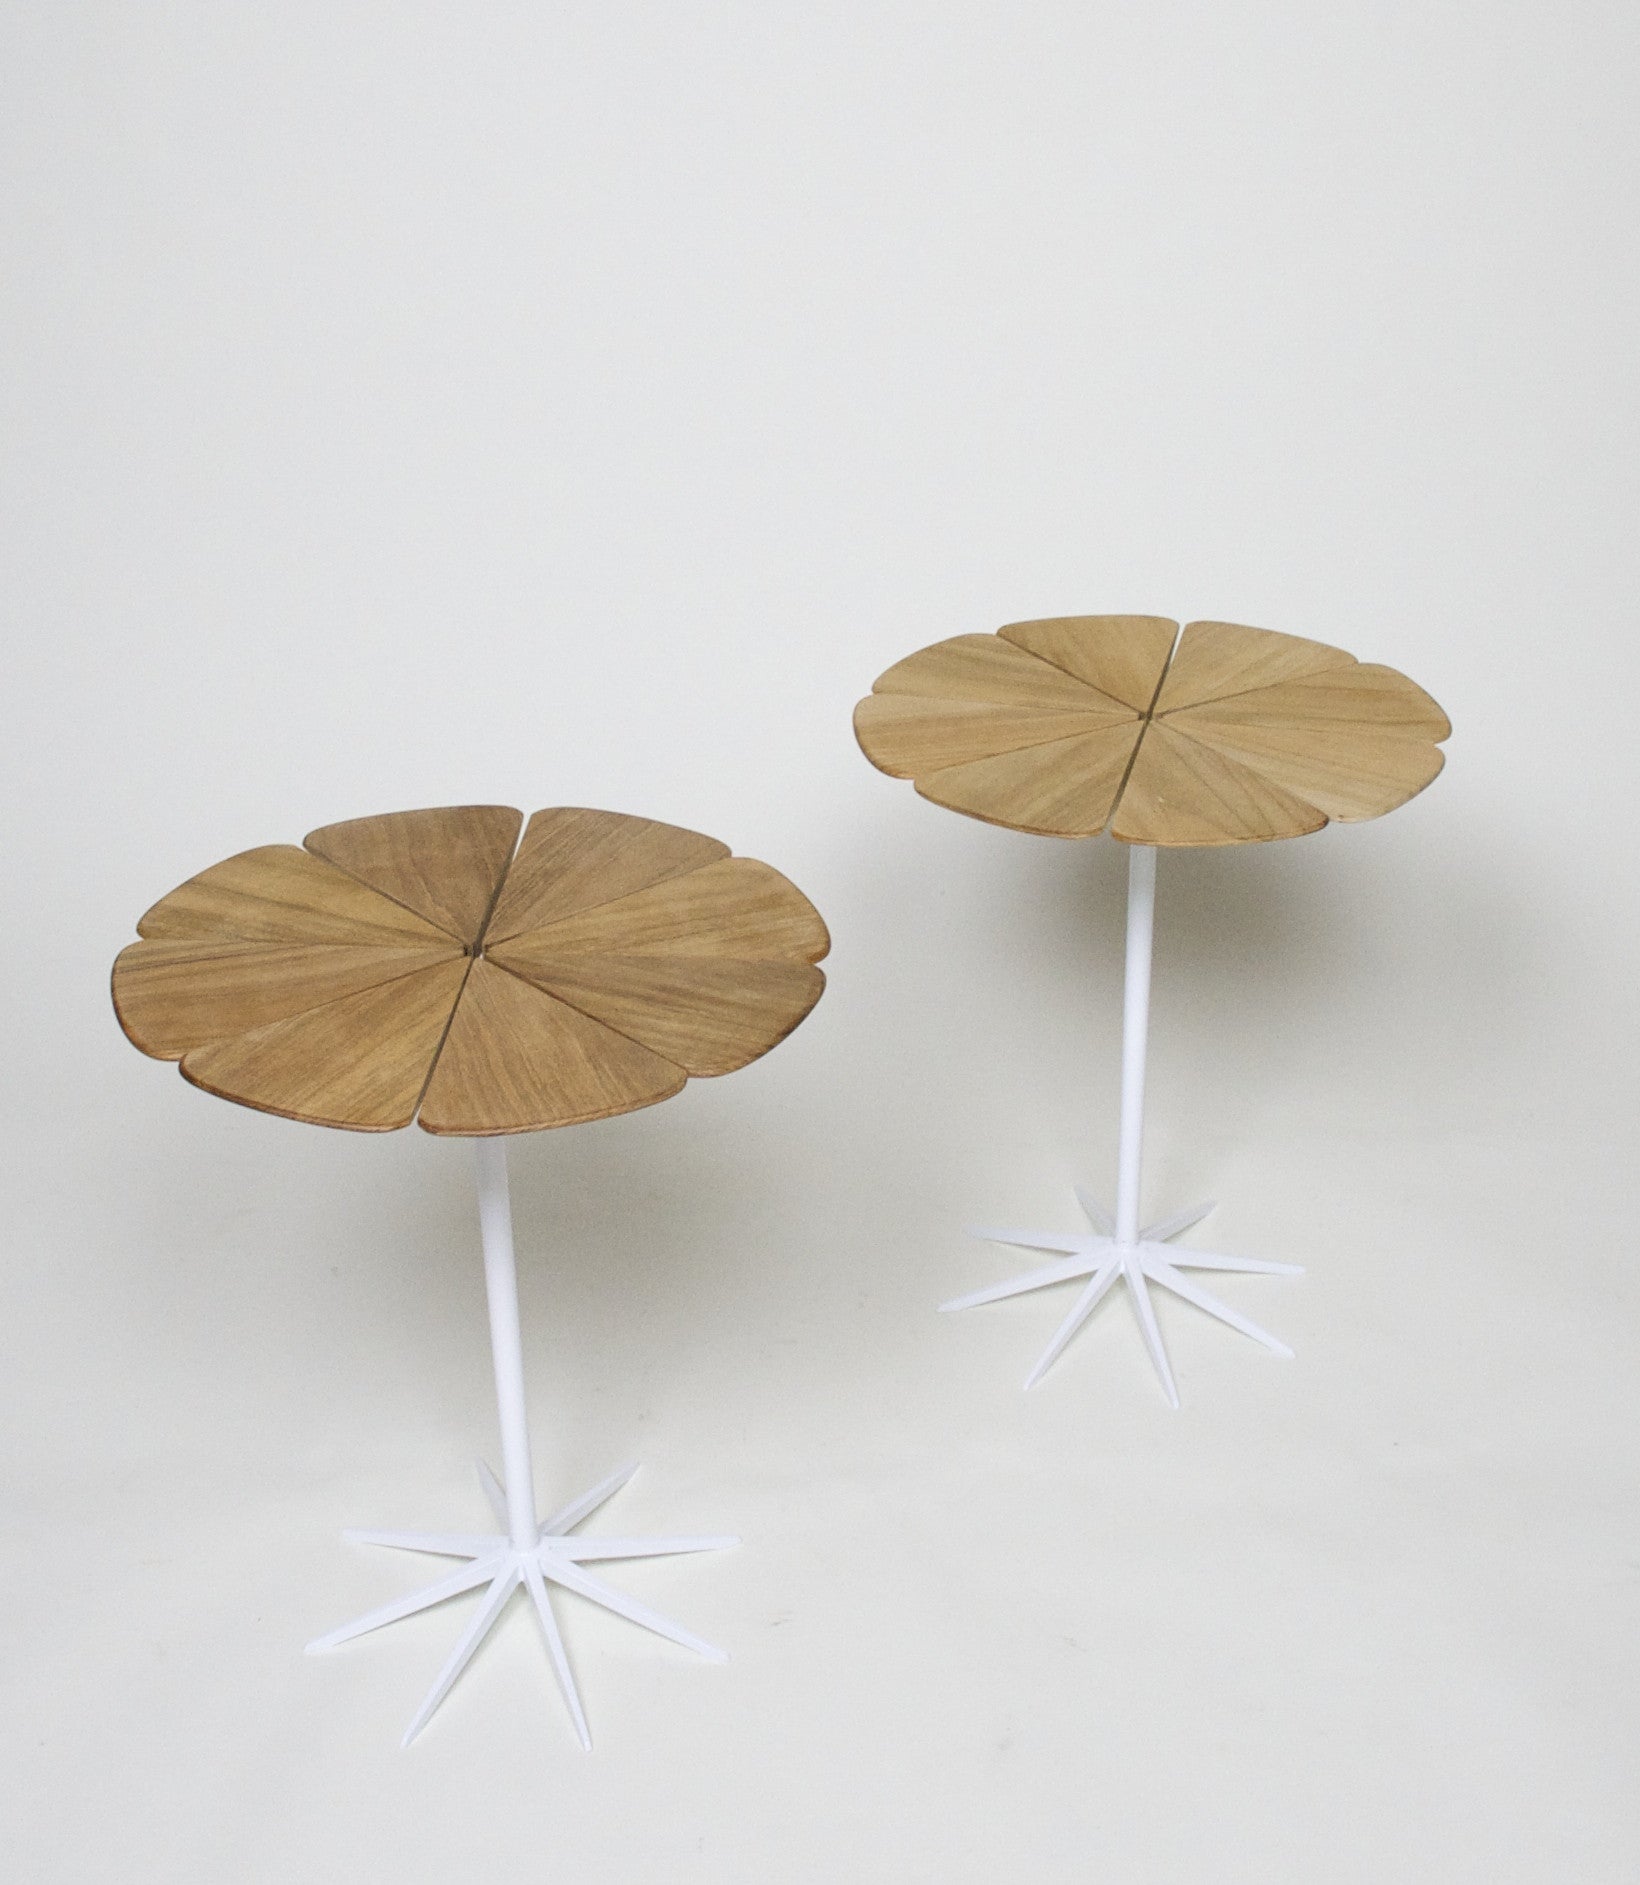 SOLD Knoll Richard Schultz Petal Tables Rare New Old Stock